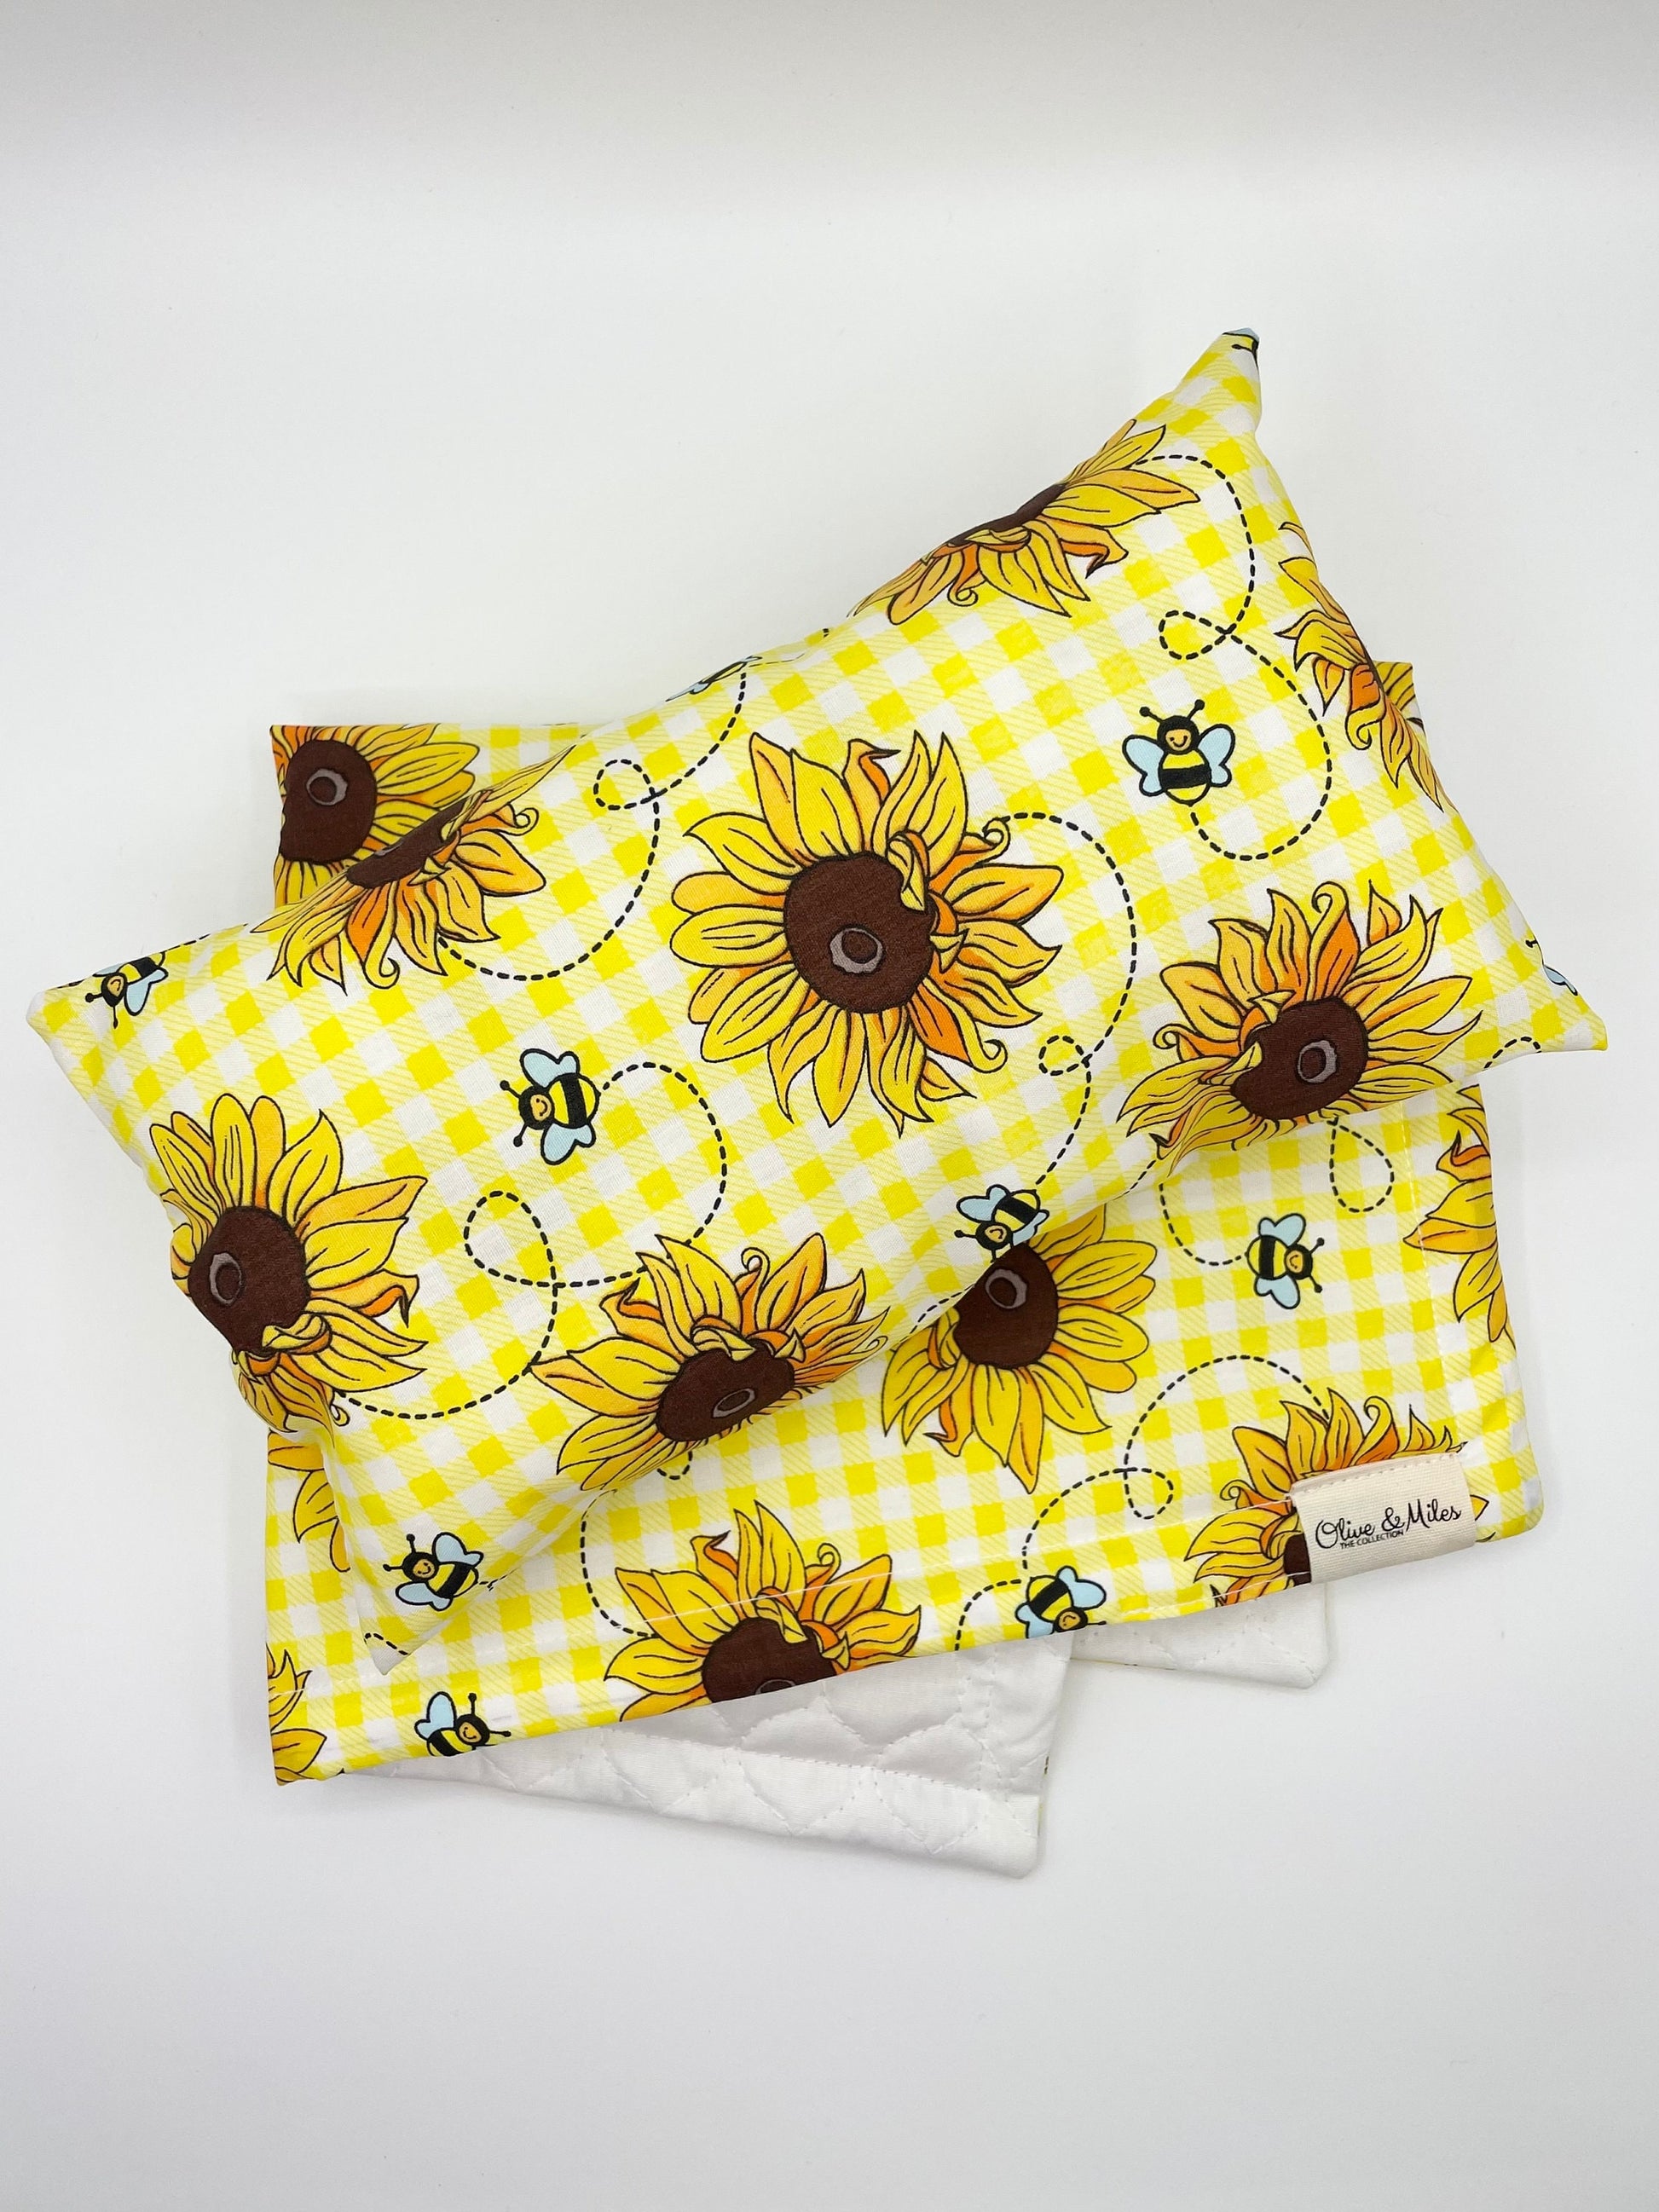 Doll Bedding Yellow Sunflower | Gift for niece | Crib sheet and pillow toy set | Doll Bed Cover Linen | Doll Cot Blanket | Crib Bedding Pram